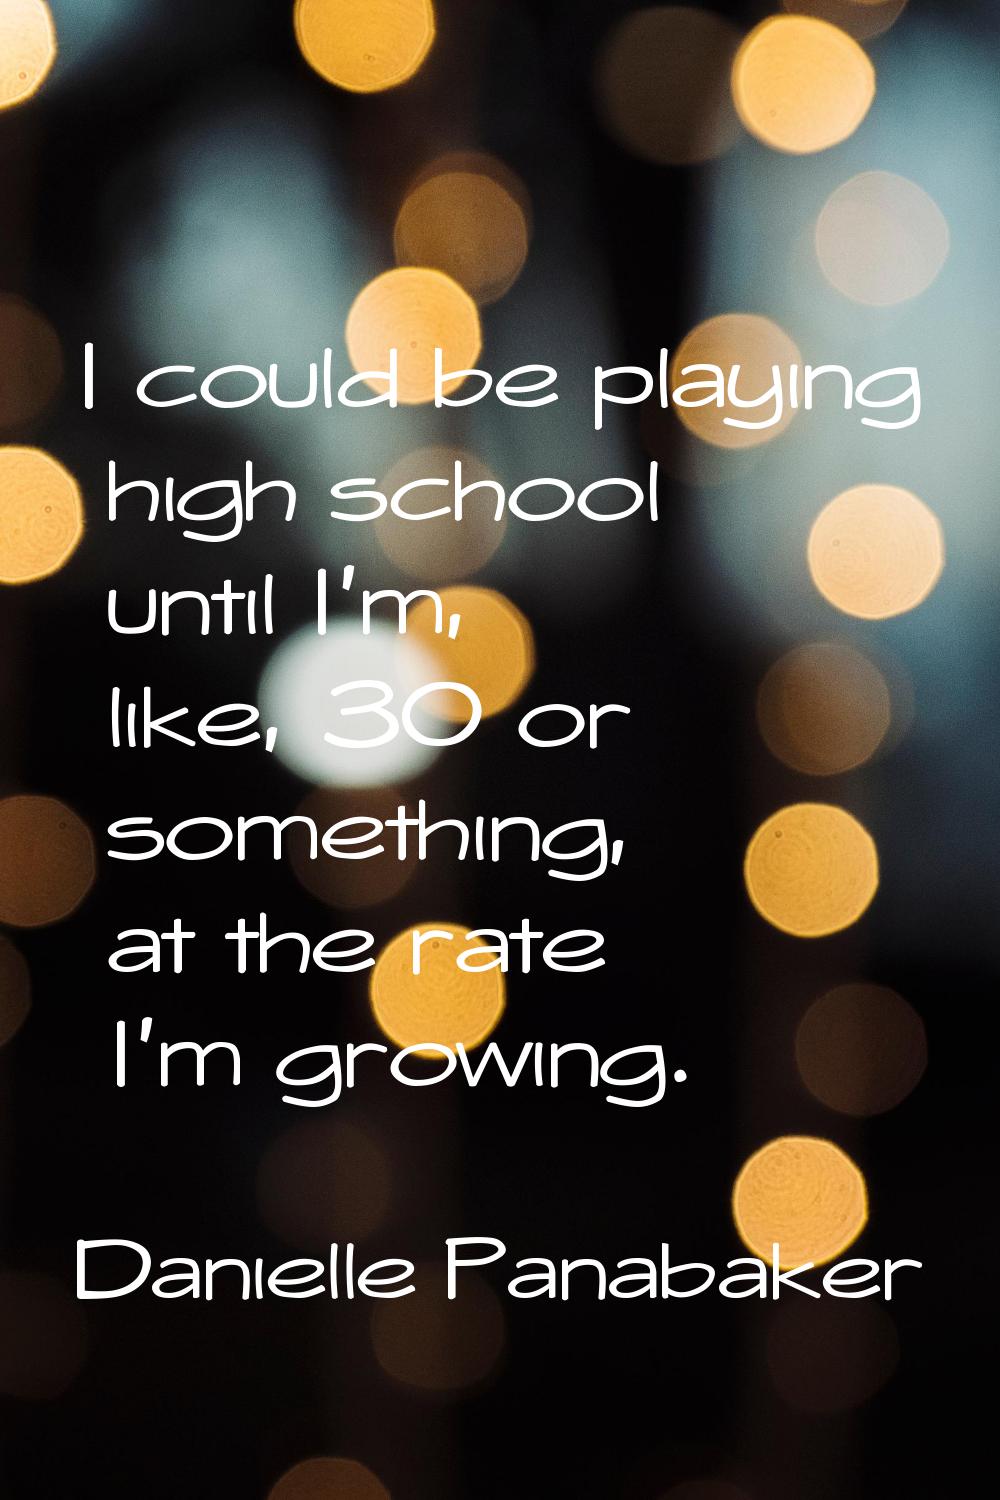 I could be playing high school until I'm, like, 30 or something, at the rate I'm growing.